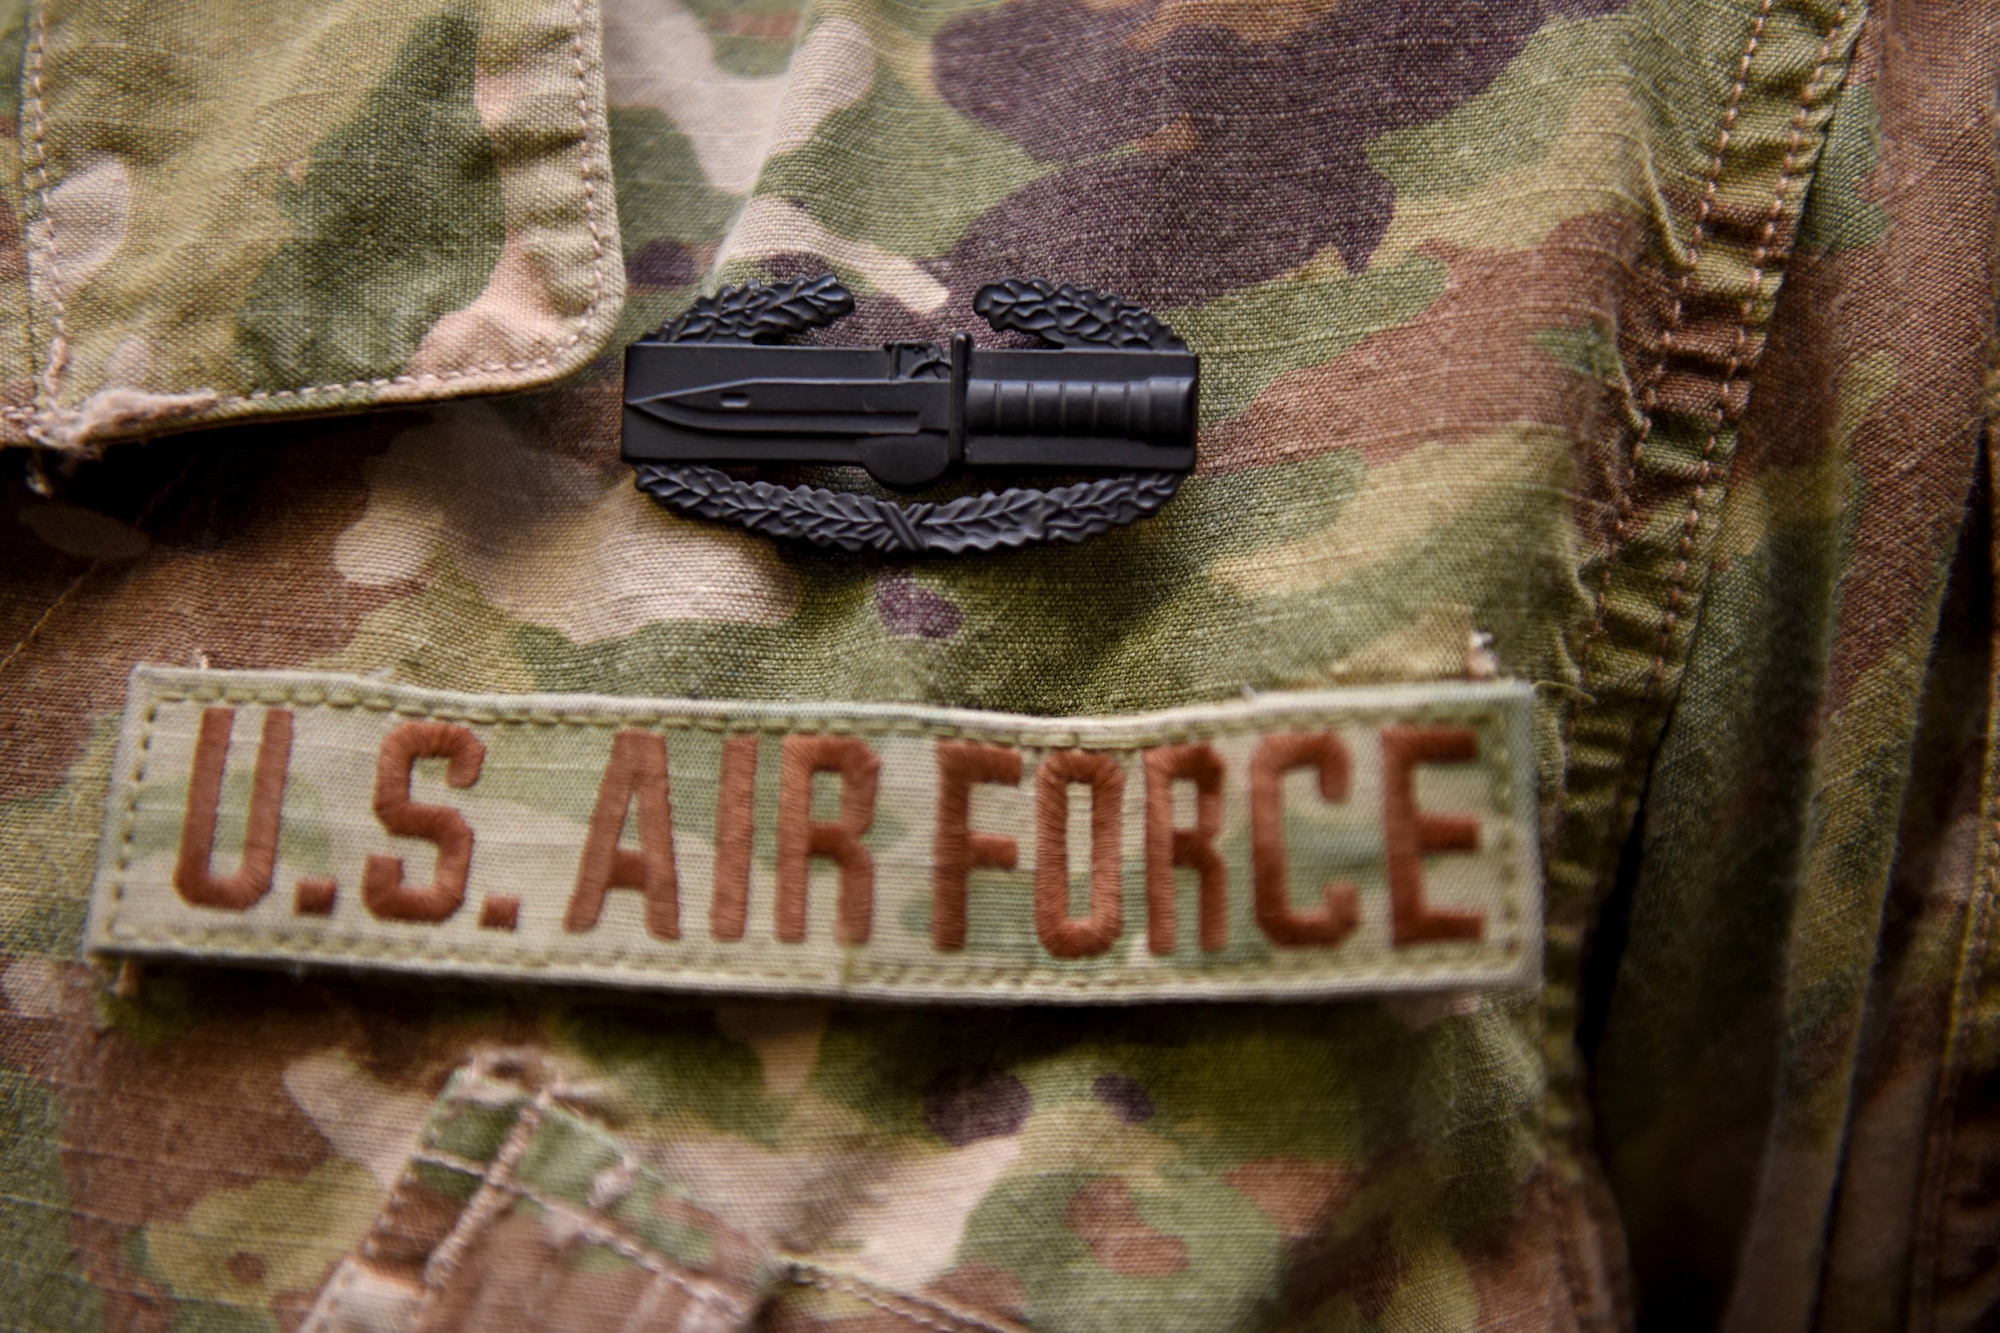 Senior Airman Joshua Harhai, an Engineering Assistant assigned to the 171st Civil Engineer Squadron has been awarded the Army Combat Action Badge during a recent deployment to Bagram, Afghanistan March 18, 2018. (U.S. Air National Guard Photo by Senior Airman Kyle Brooks)